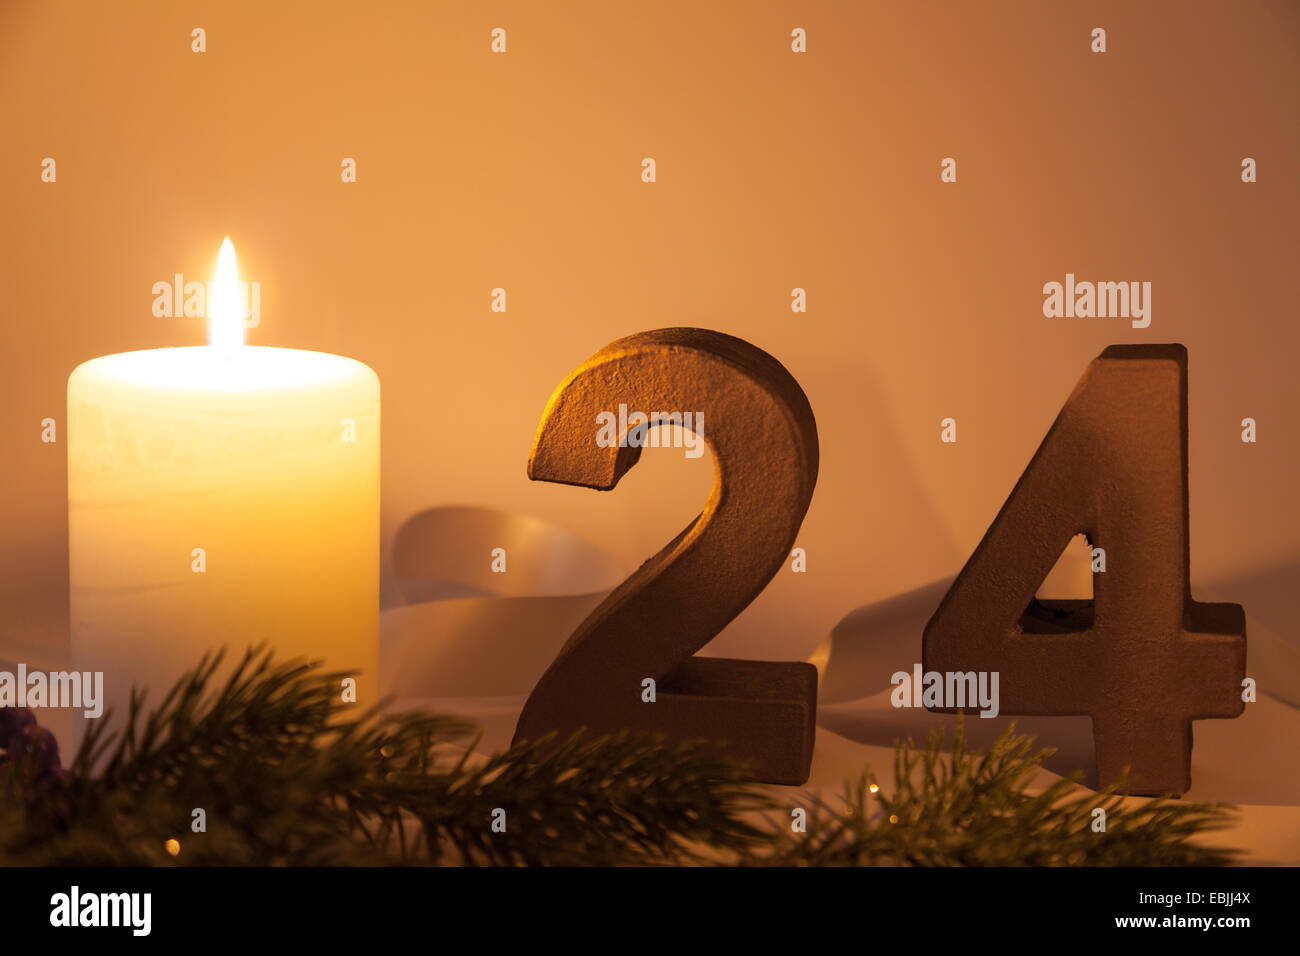 24th of december with white candle Stock Photo